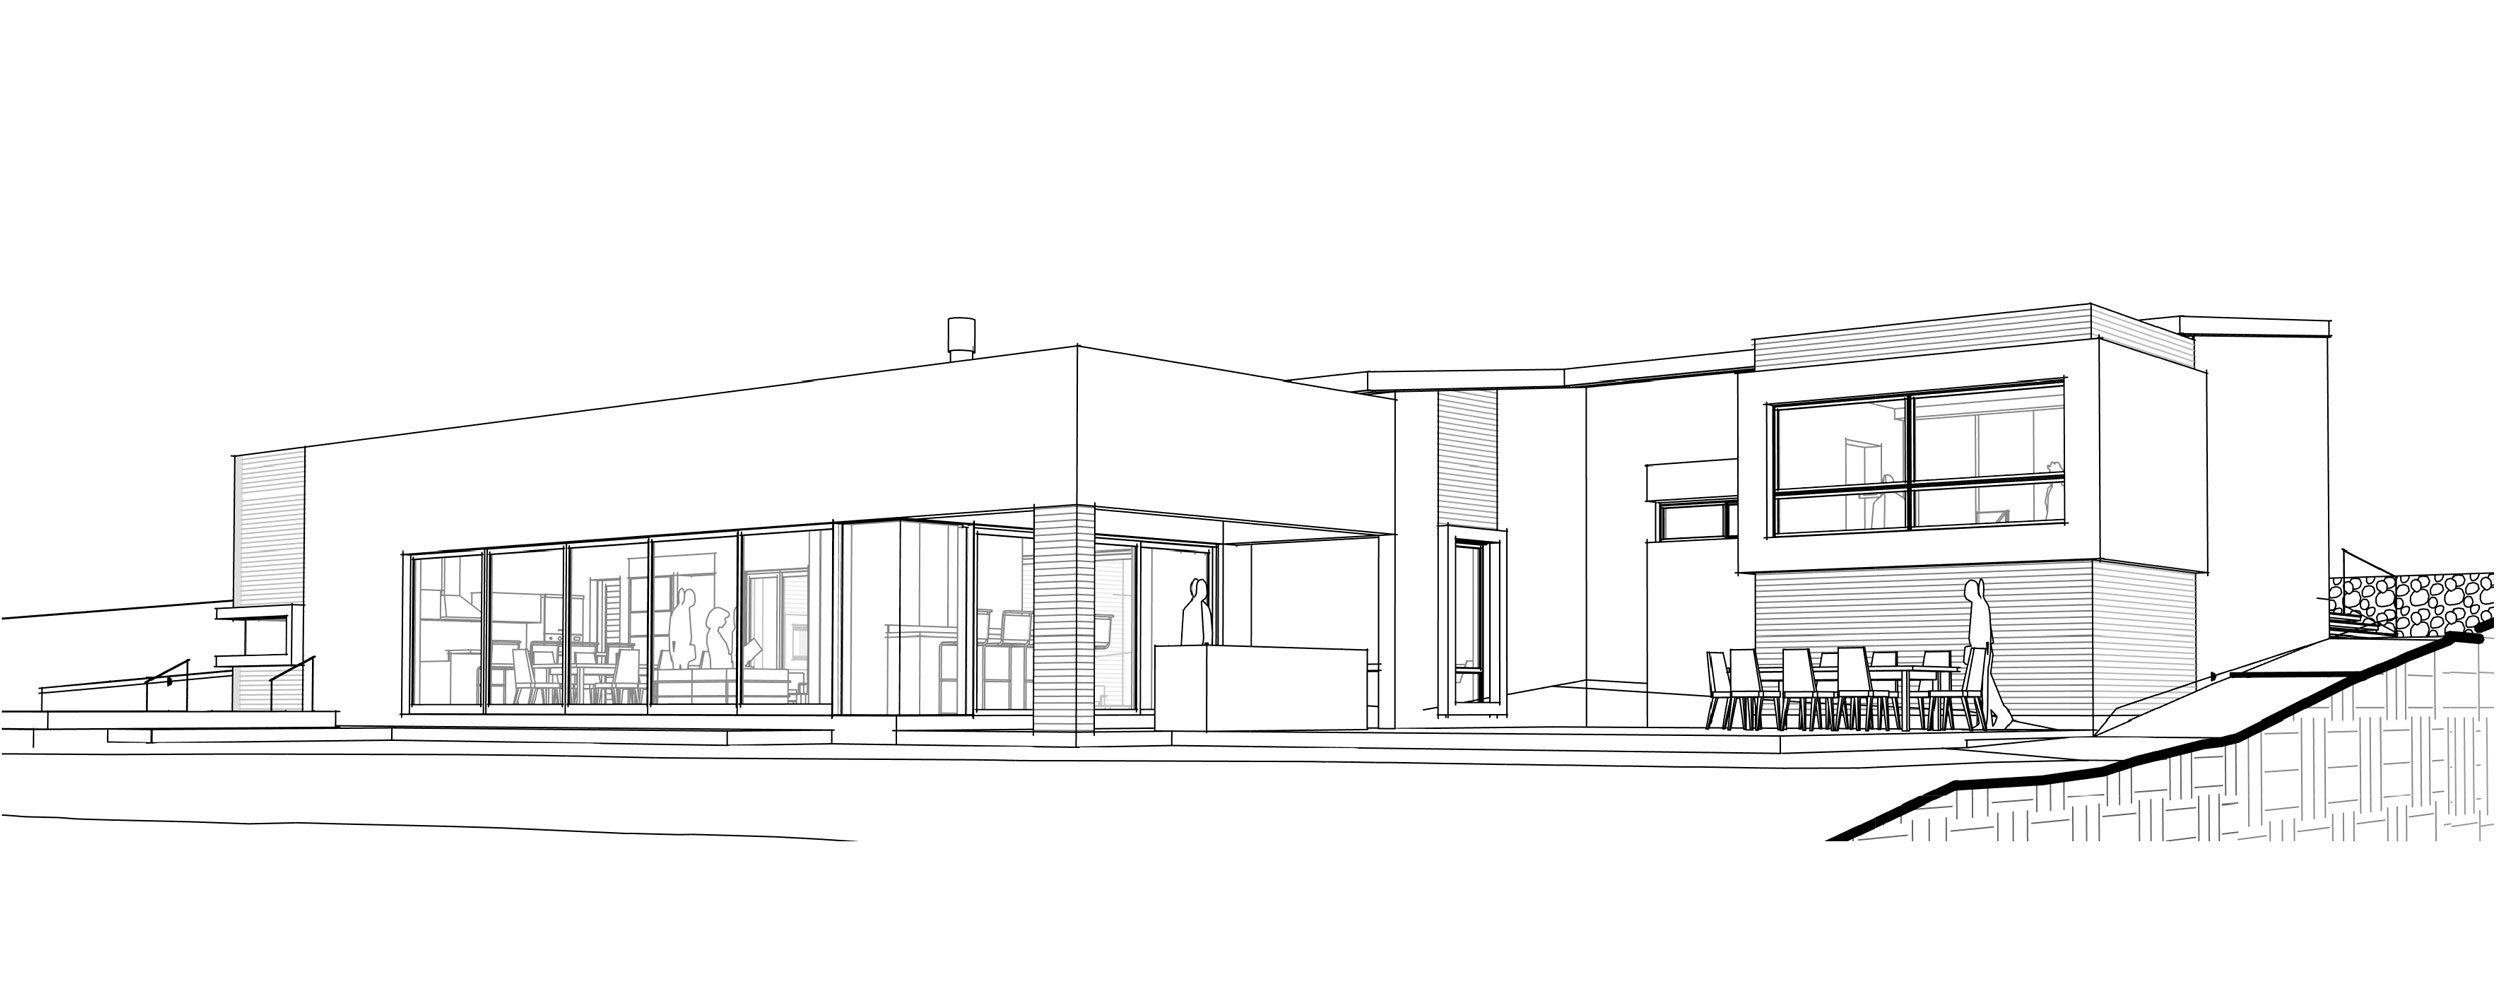 nieuwoudt-architects-single-residence-western-cape-sketch